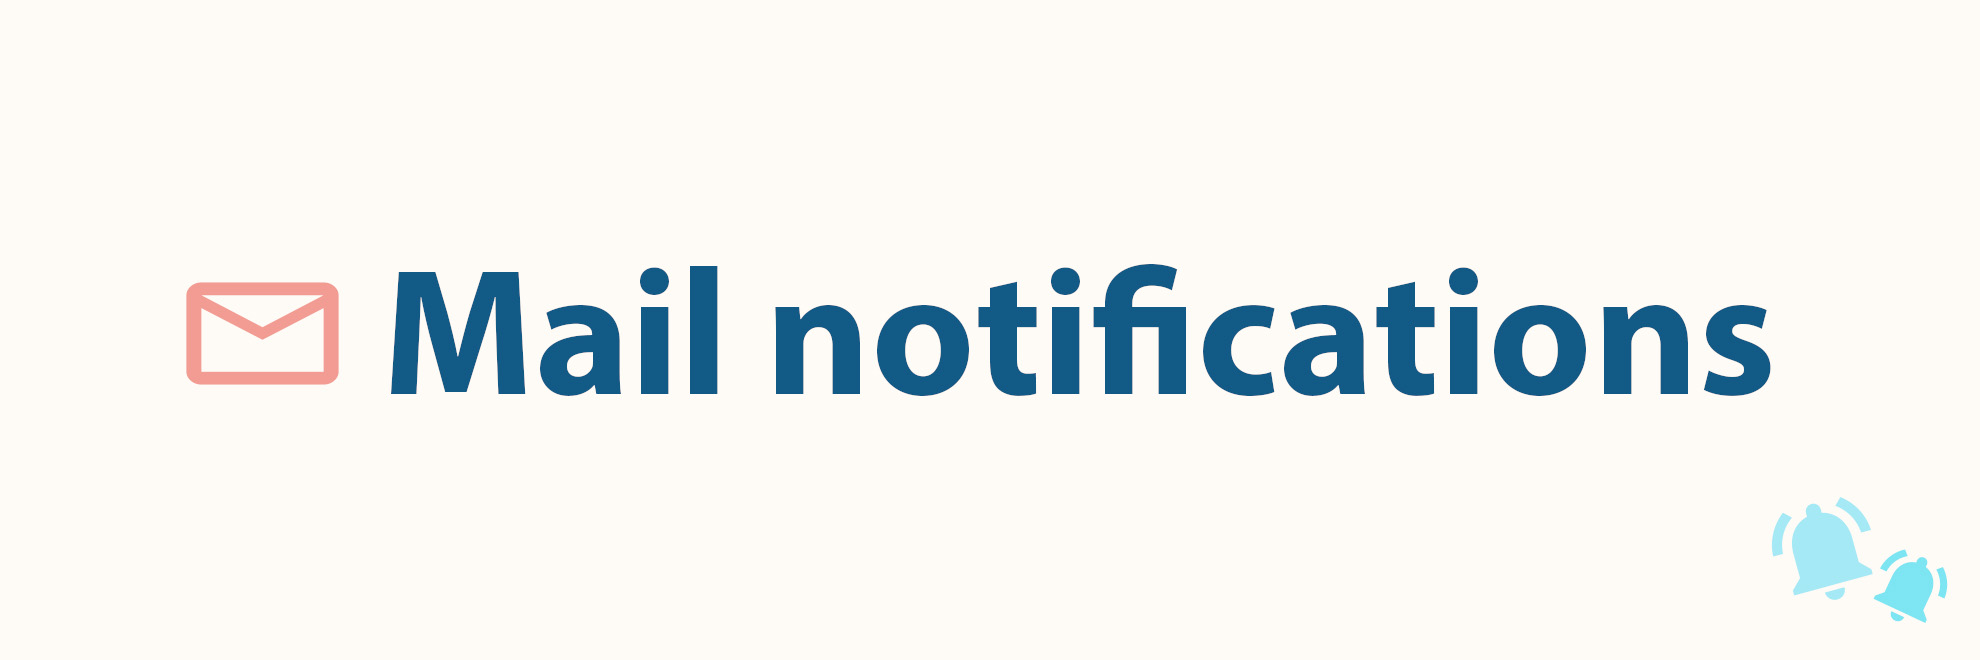 Simple illustration with email envelope, ringing bells and mail notifications text.